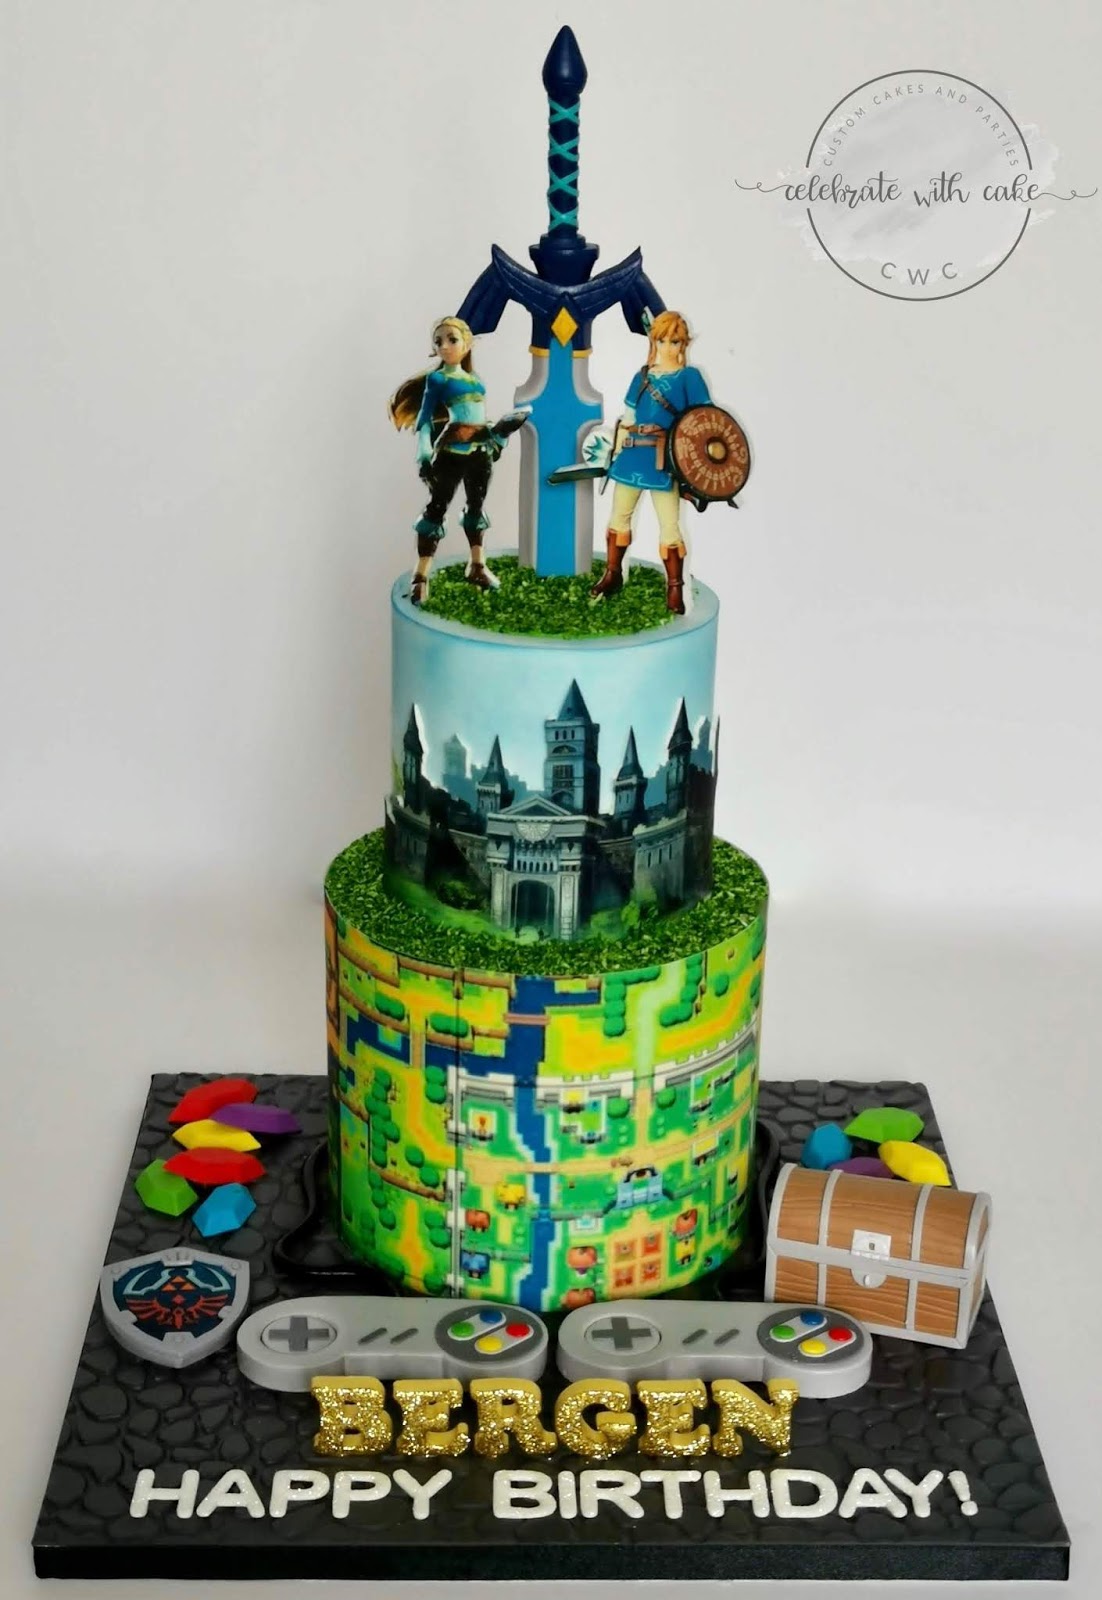 Celebrate with Cake!: Legend of Zelda two tier Cake